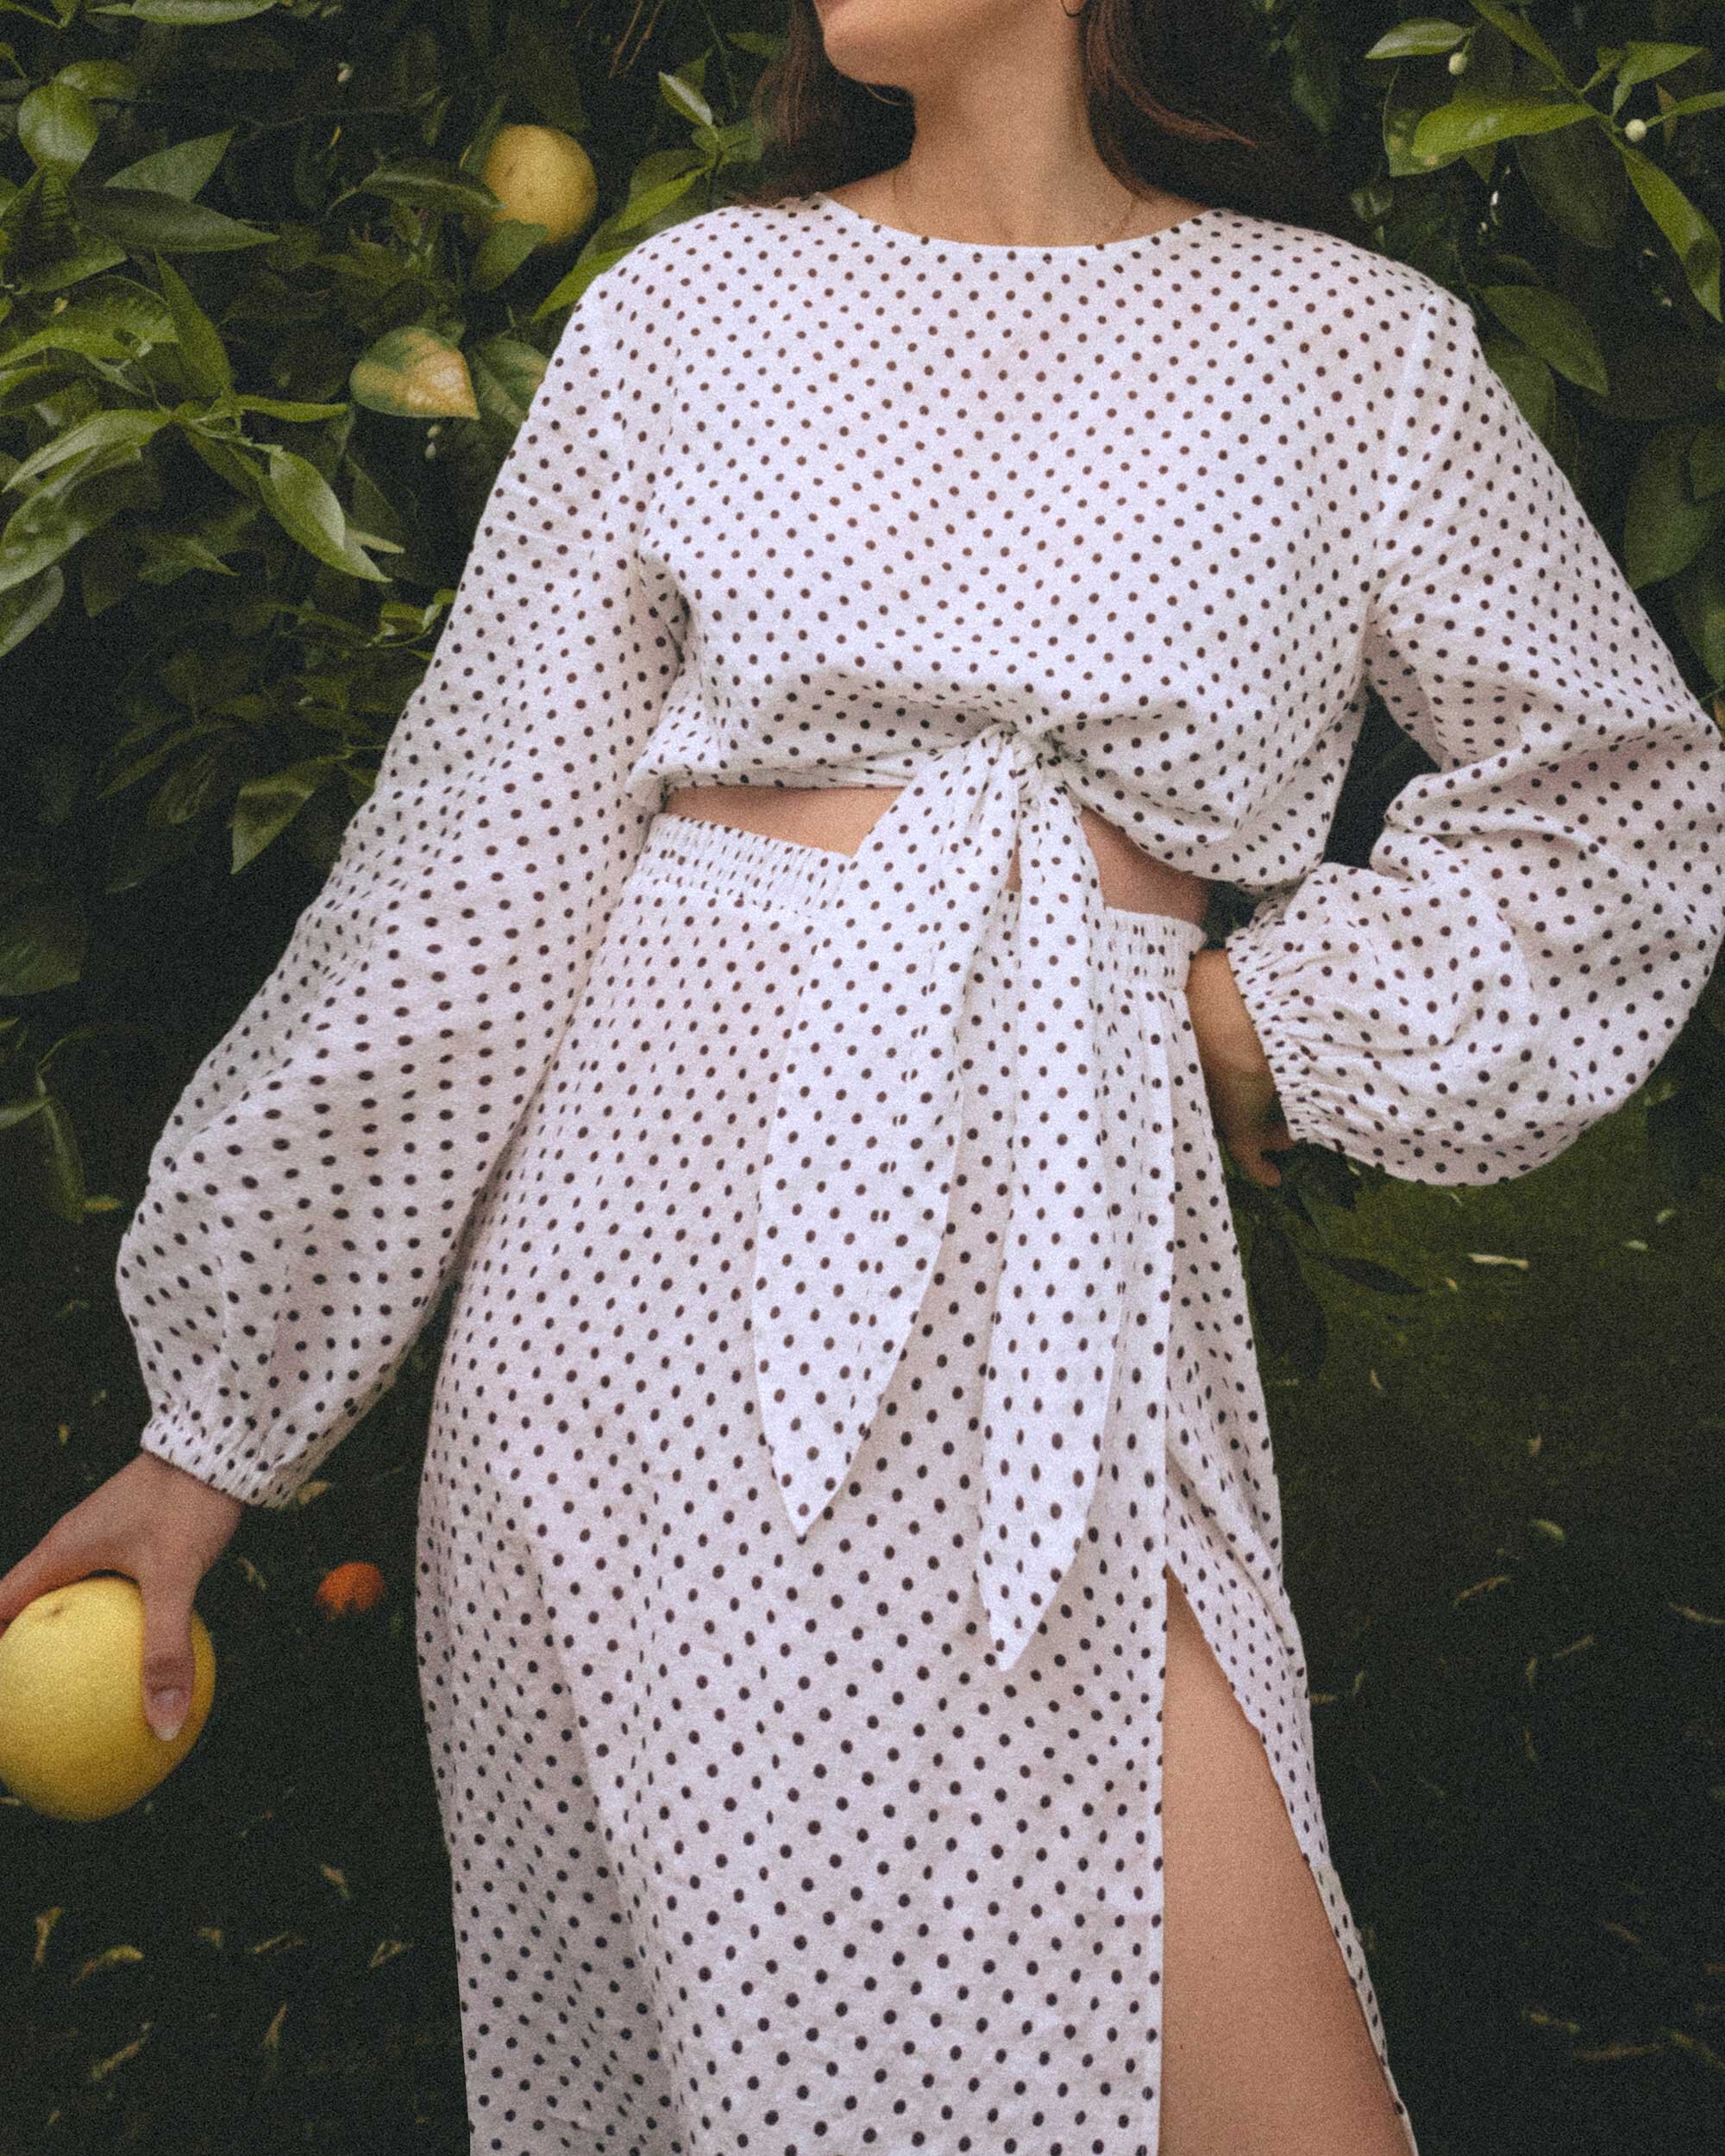 Cute Spring Outfit Idea Polka-dot blouse and skirt. Sarah Butler of @sarahchristine wearing Peony polka-dot organic cotton-blend blouse and Peony polka-dot maxi skirt with slit in California - 2.jpg